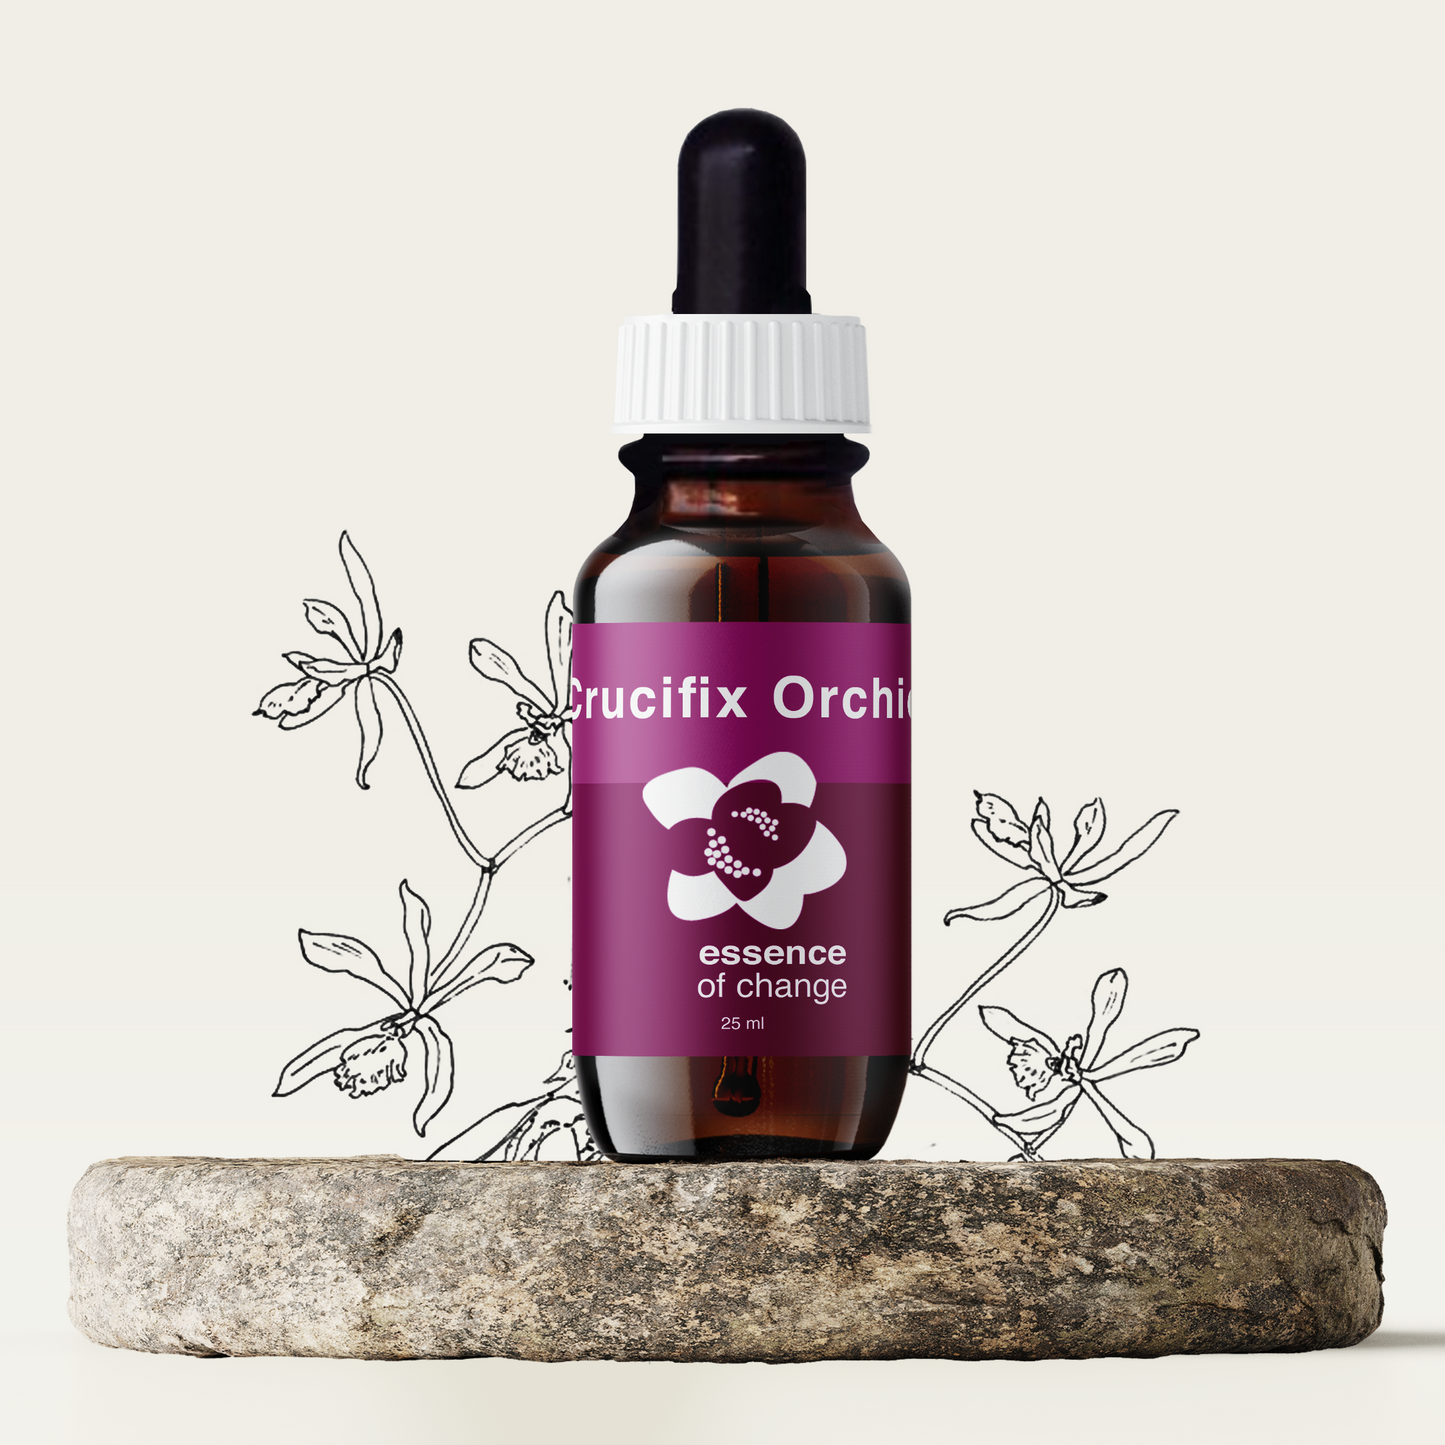 Crucifix Orchid Flower Essence - Reconnect